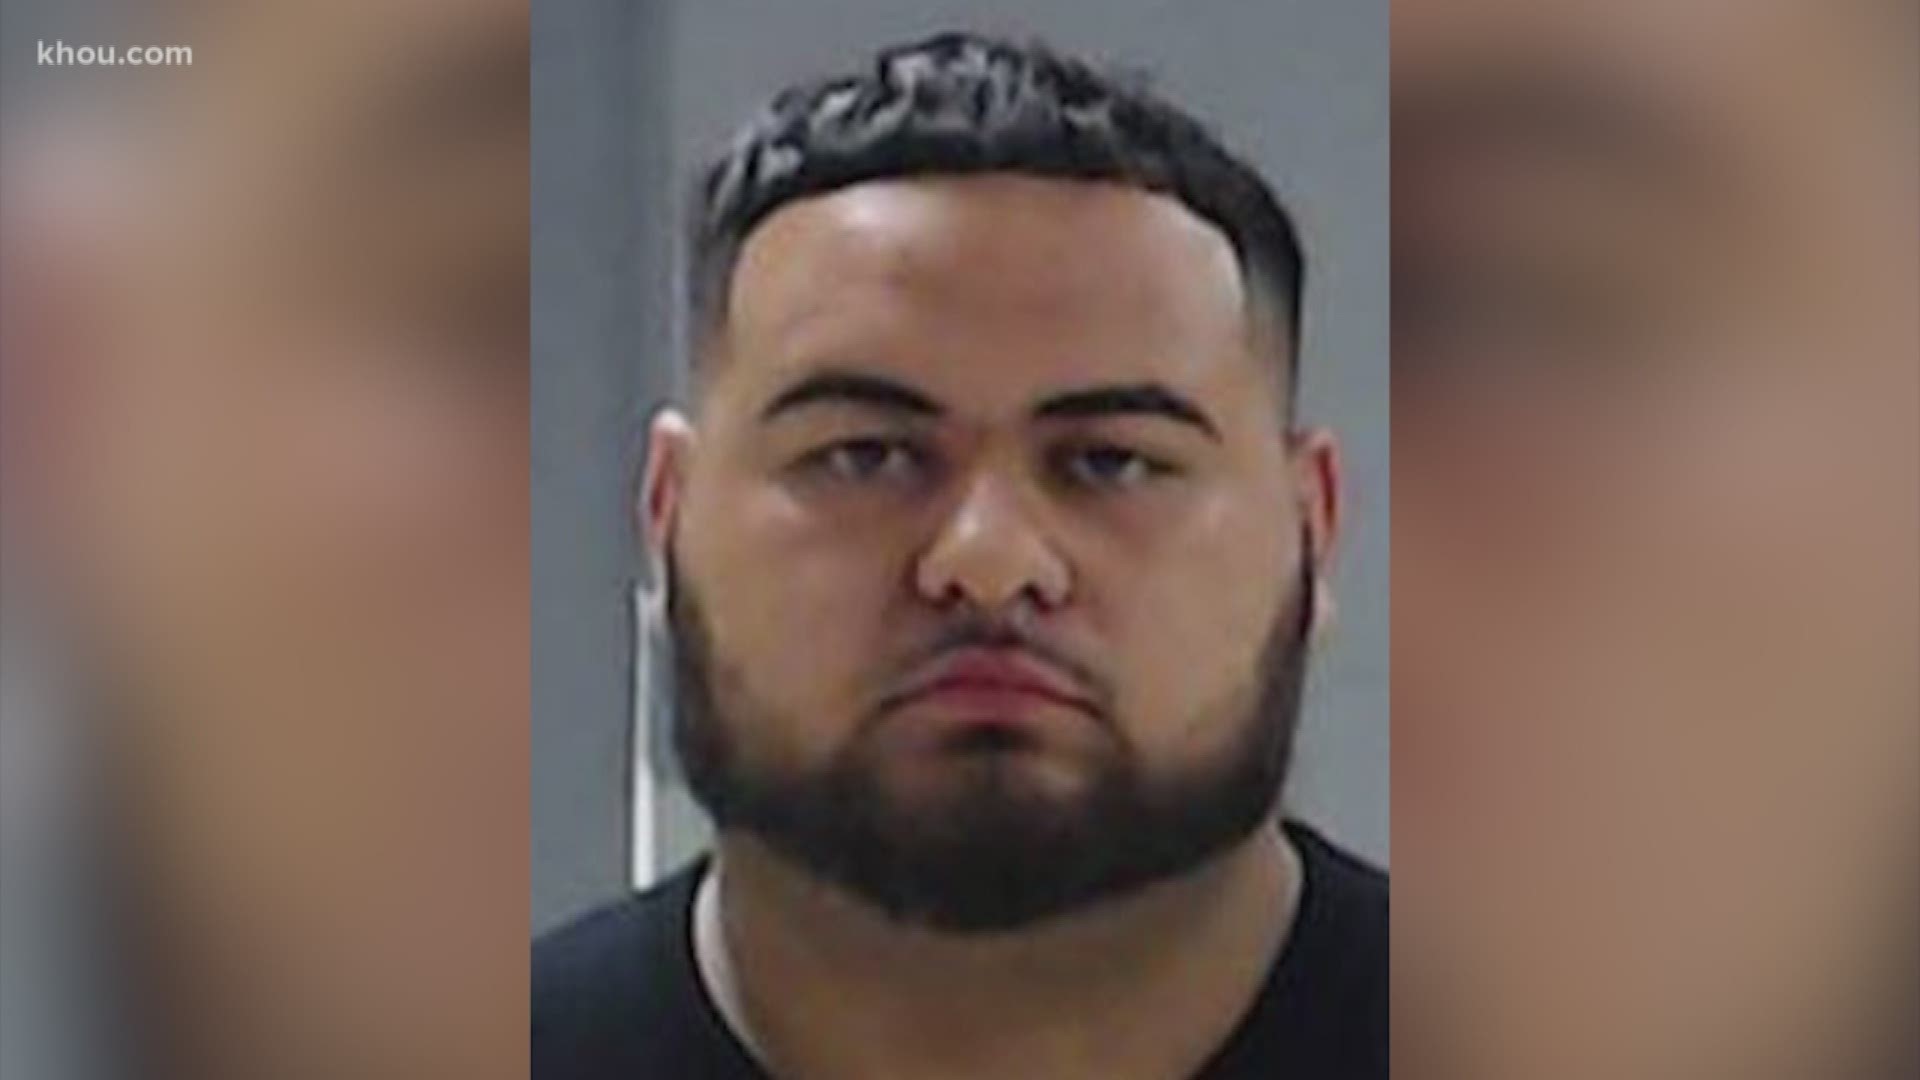 A man accused of killing 2 people and injuring a dozen more at a homecoming party near Texas A&M Commerce has been arrested and charged with capital murder.